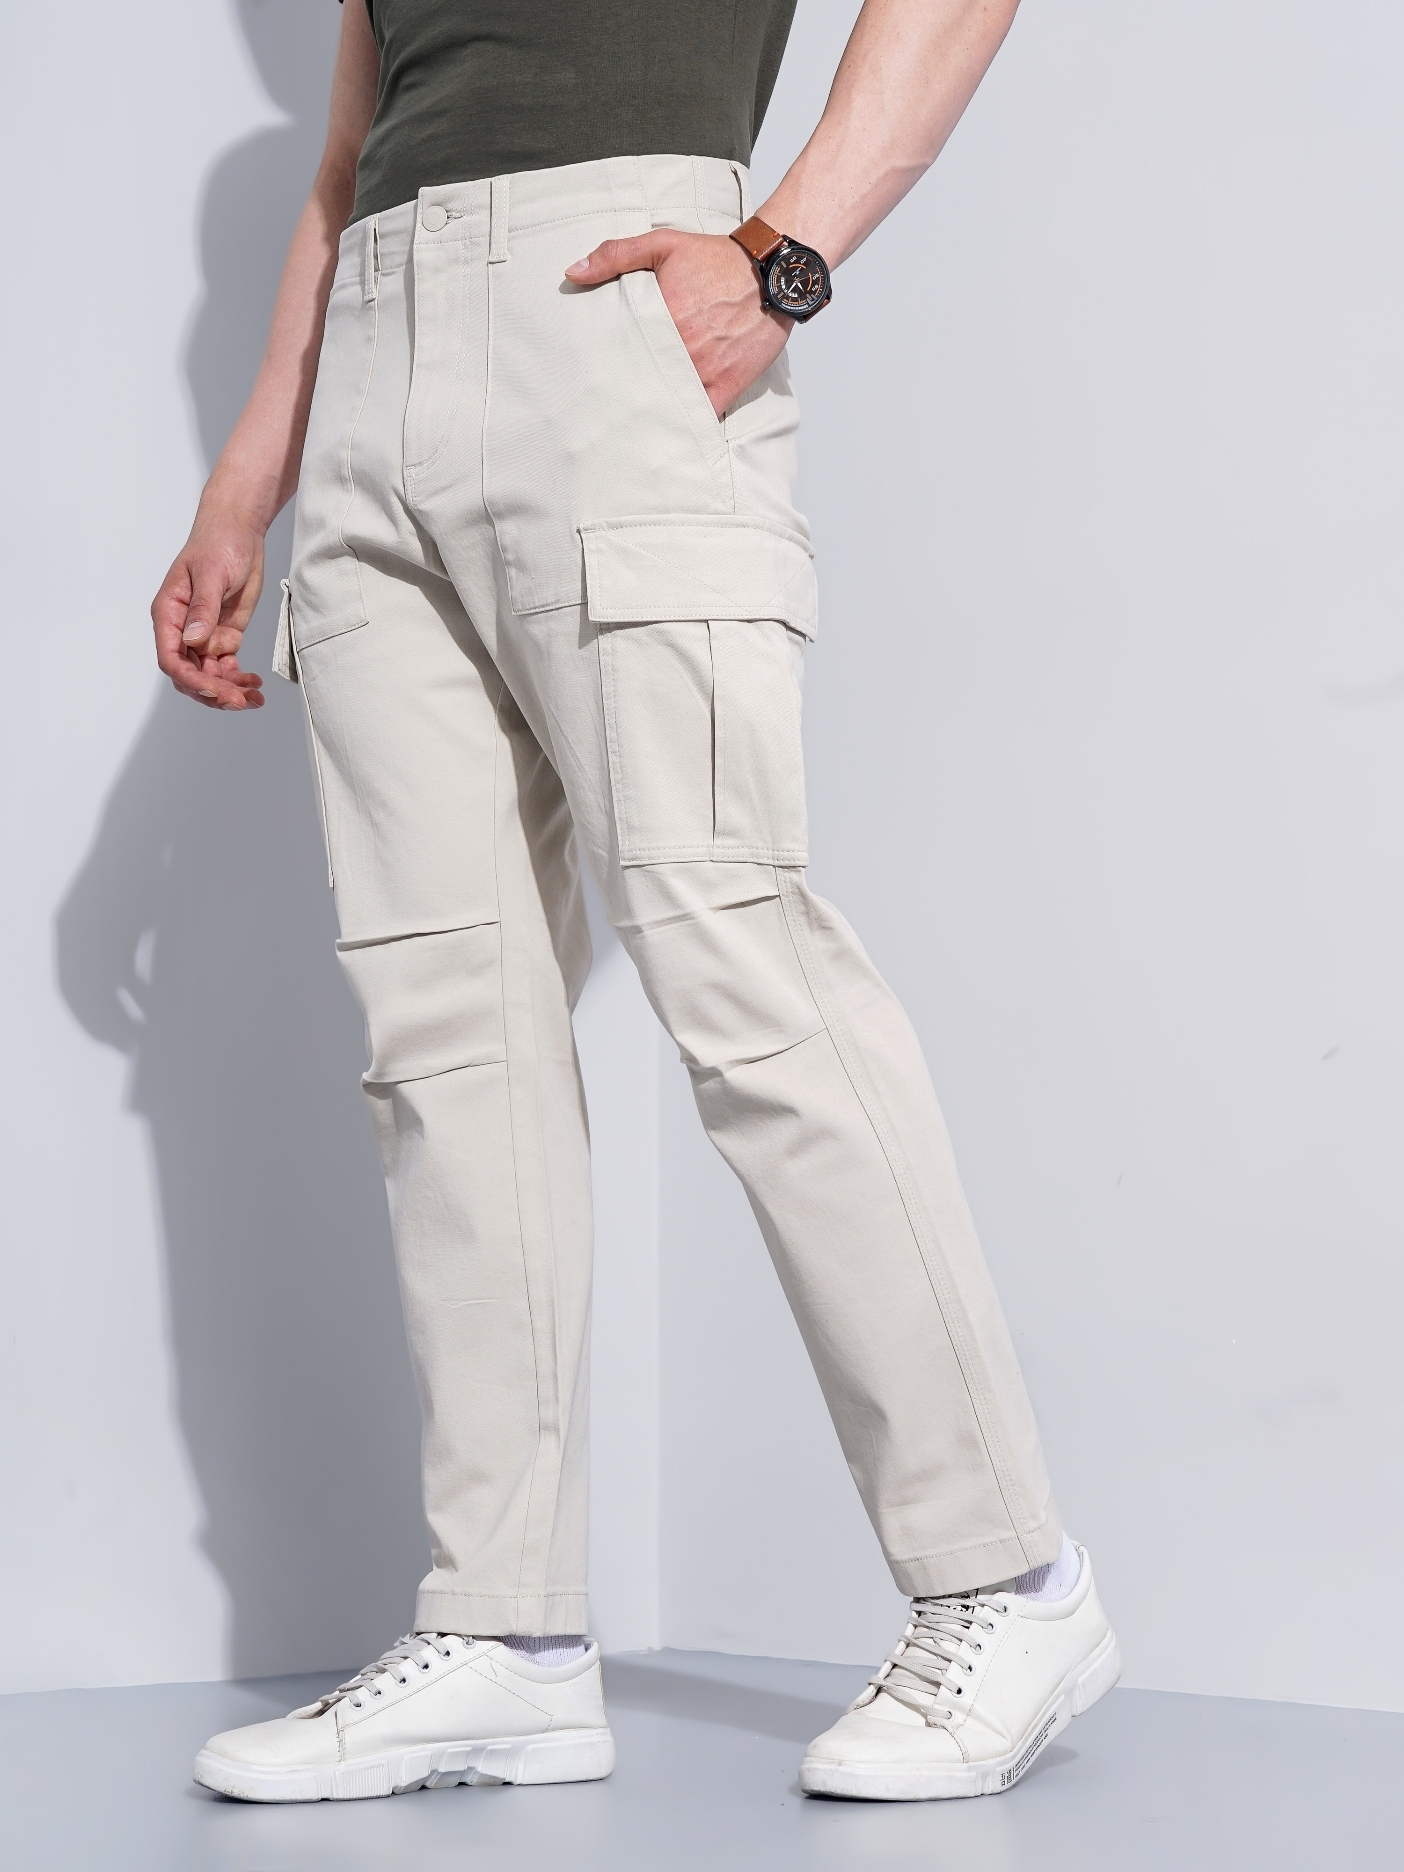 White cargo pants & trousers for women, Casual wear - Loose fit.